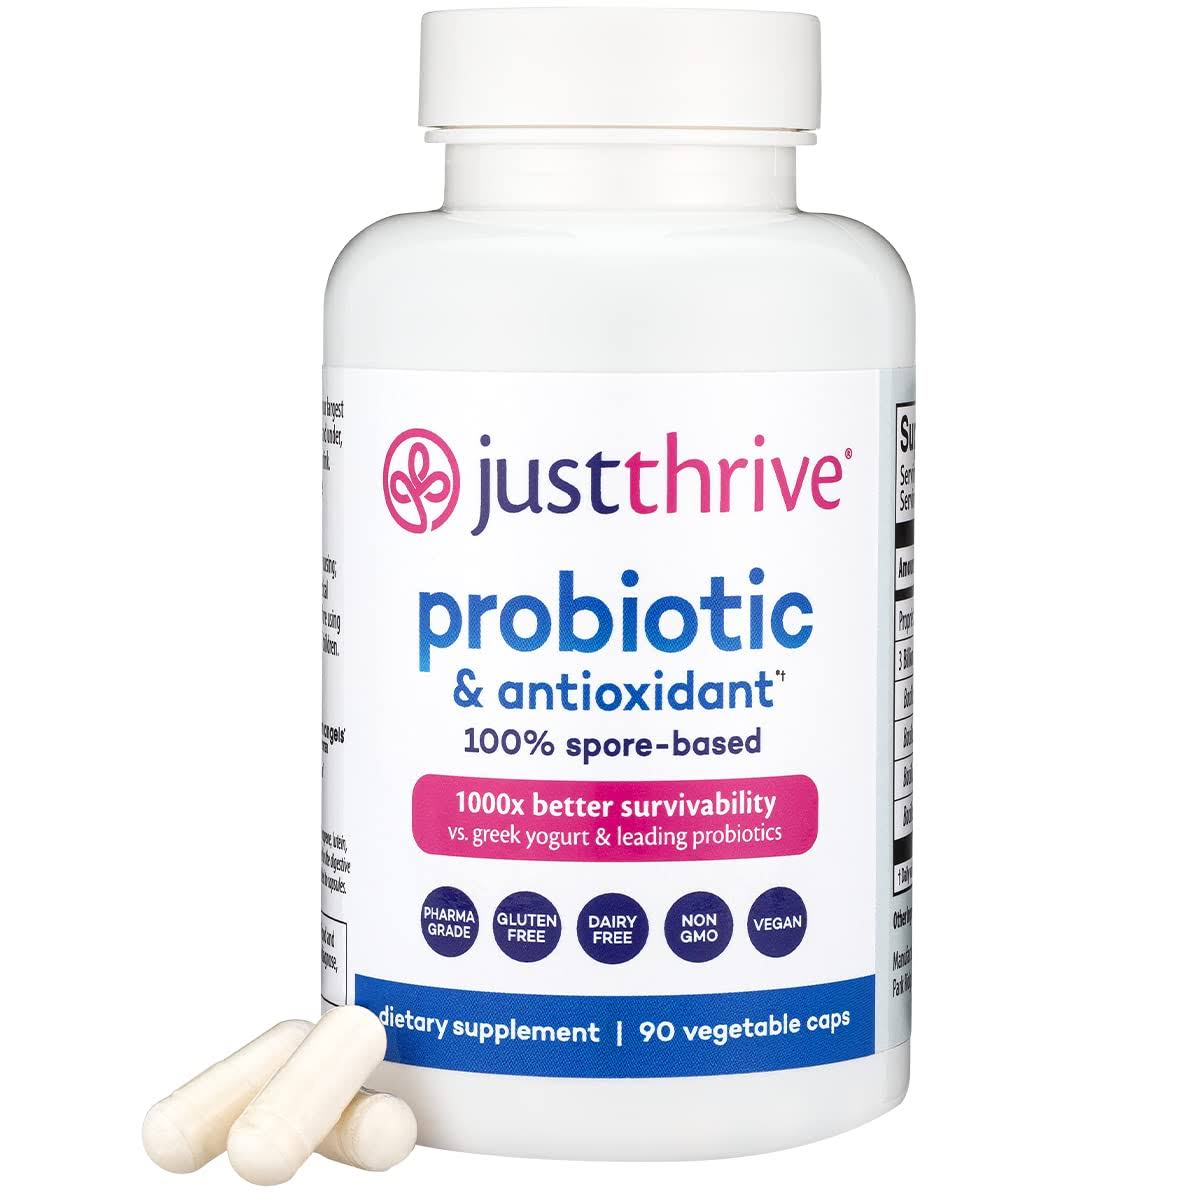 Just Thrive:Probiotic & Antioxidant Supplement - 90 Day Supply - 100% Spore-Based Probiotic - 1000X Better Survivability Than Leading Probiotics -